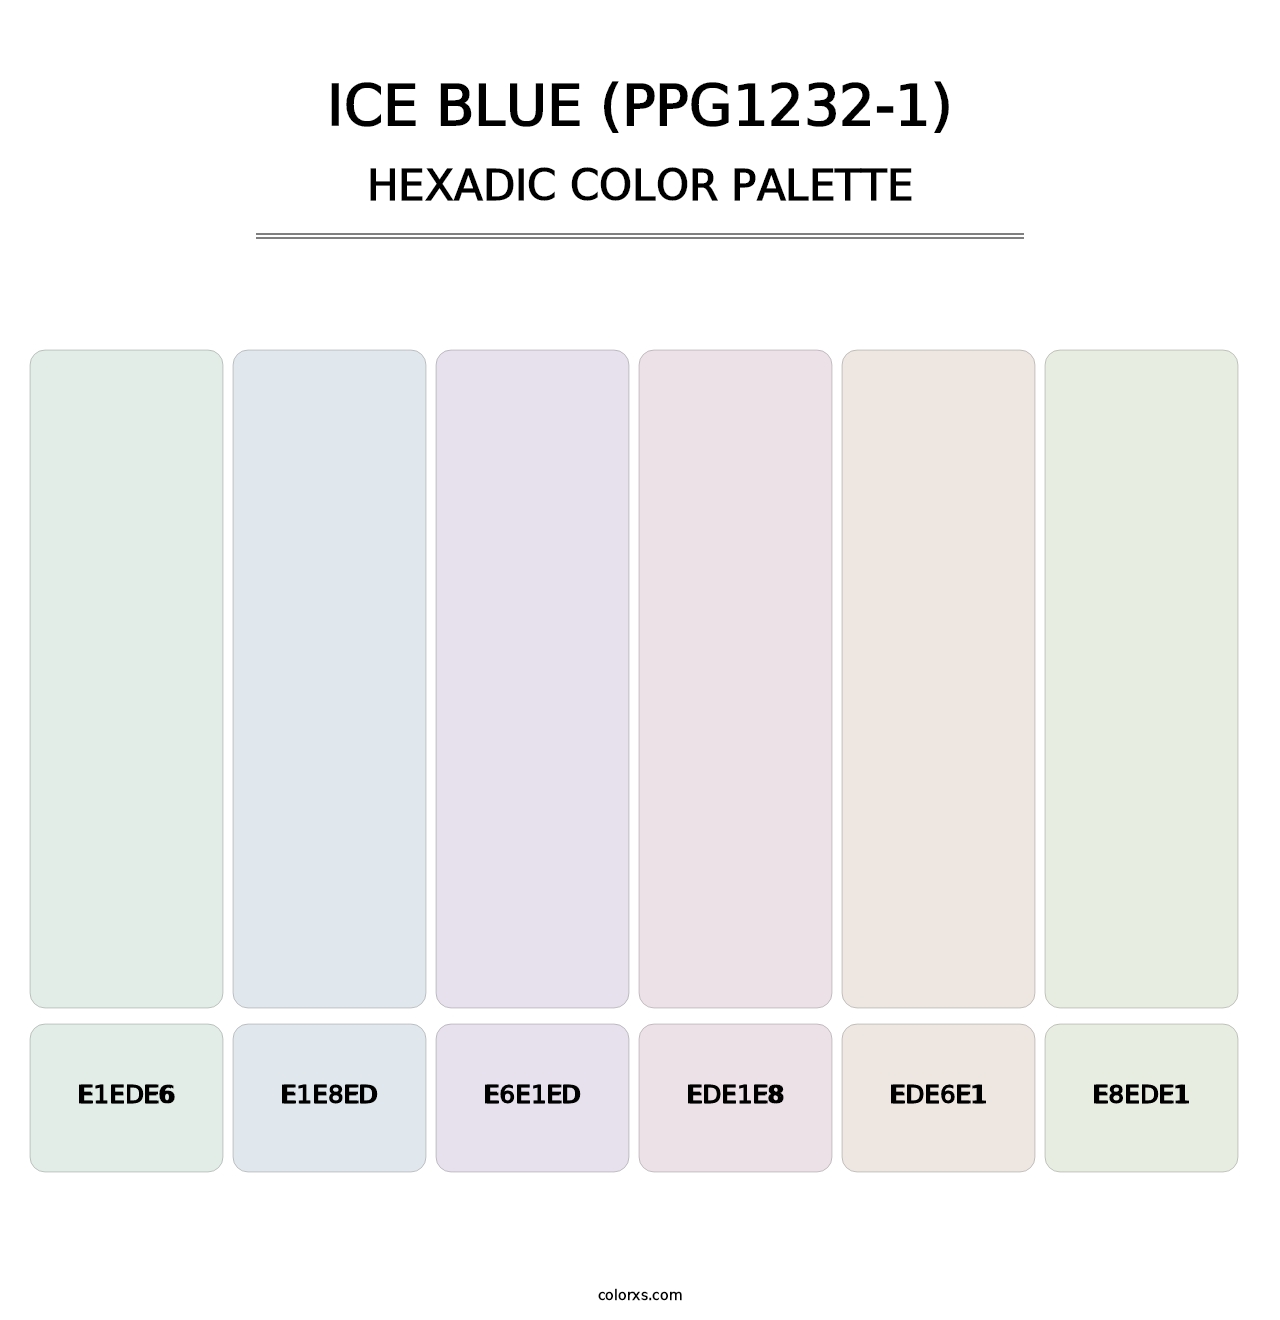 Ice Blue (PPG1232-1) - Hexadic Color Palette